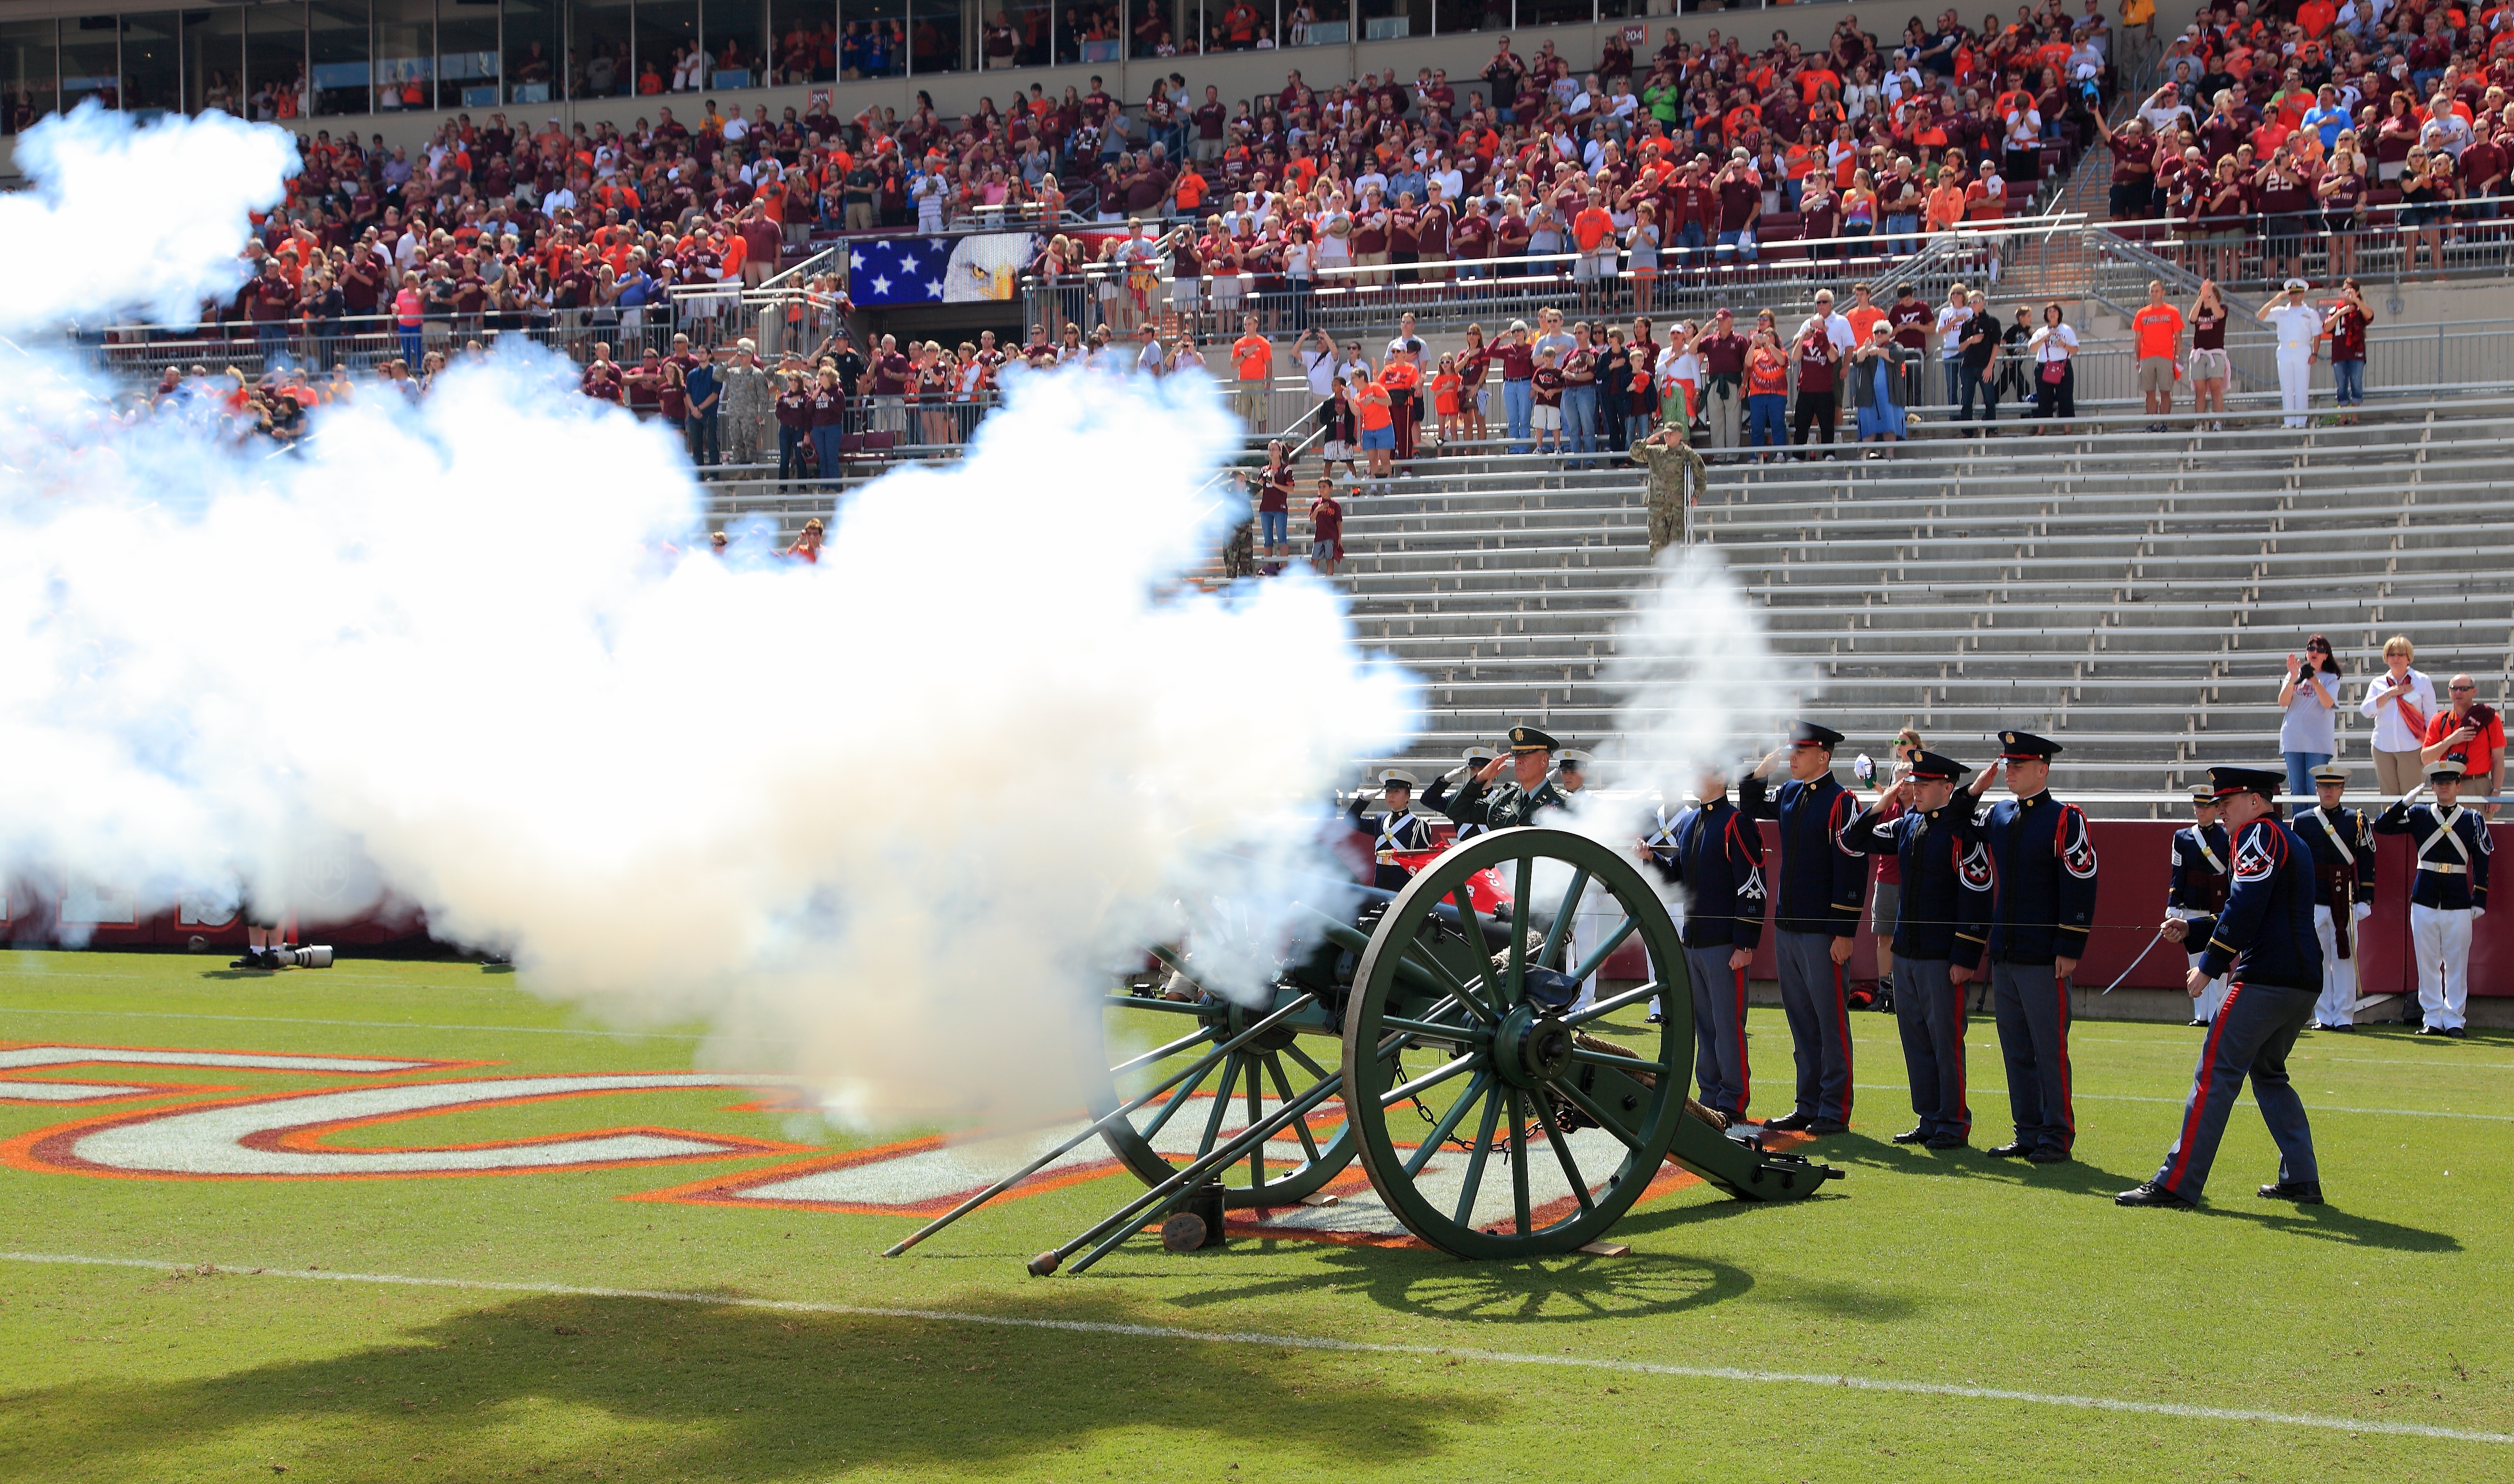 Skipper, the Corps of Cadets cannon, fires at the end of the national anthem prior to kickoff of the Bowling Green game in Lane Stadium.